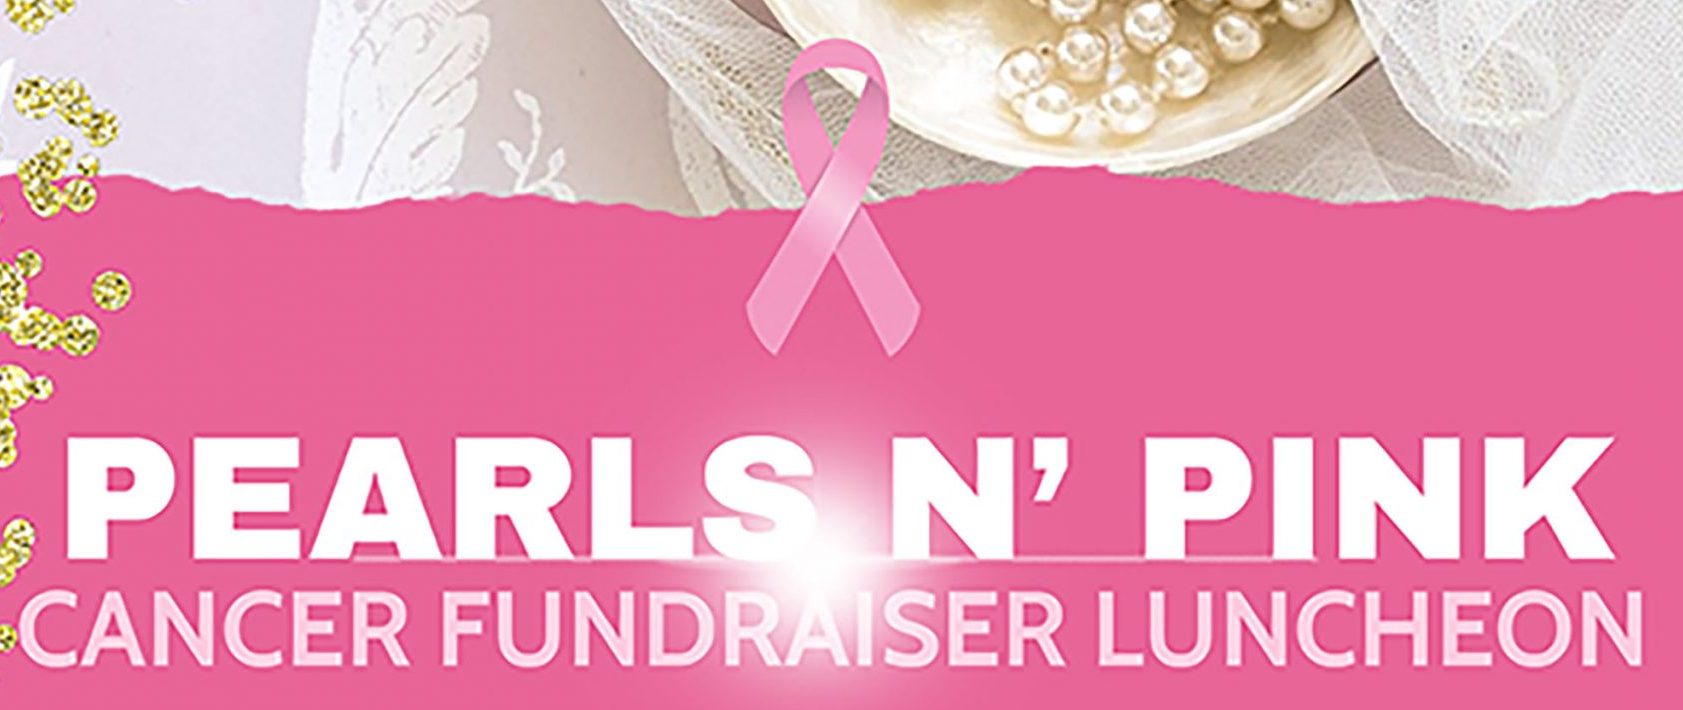 Pearls & Pink Cancer Fundraiser Luncheon Breast and Body Health Inc.